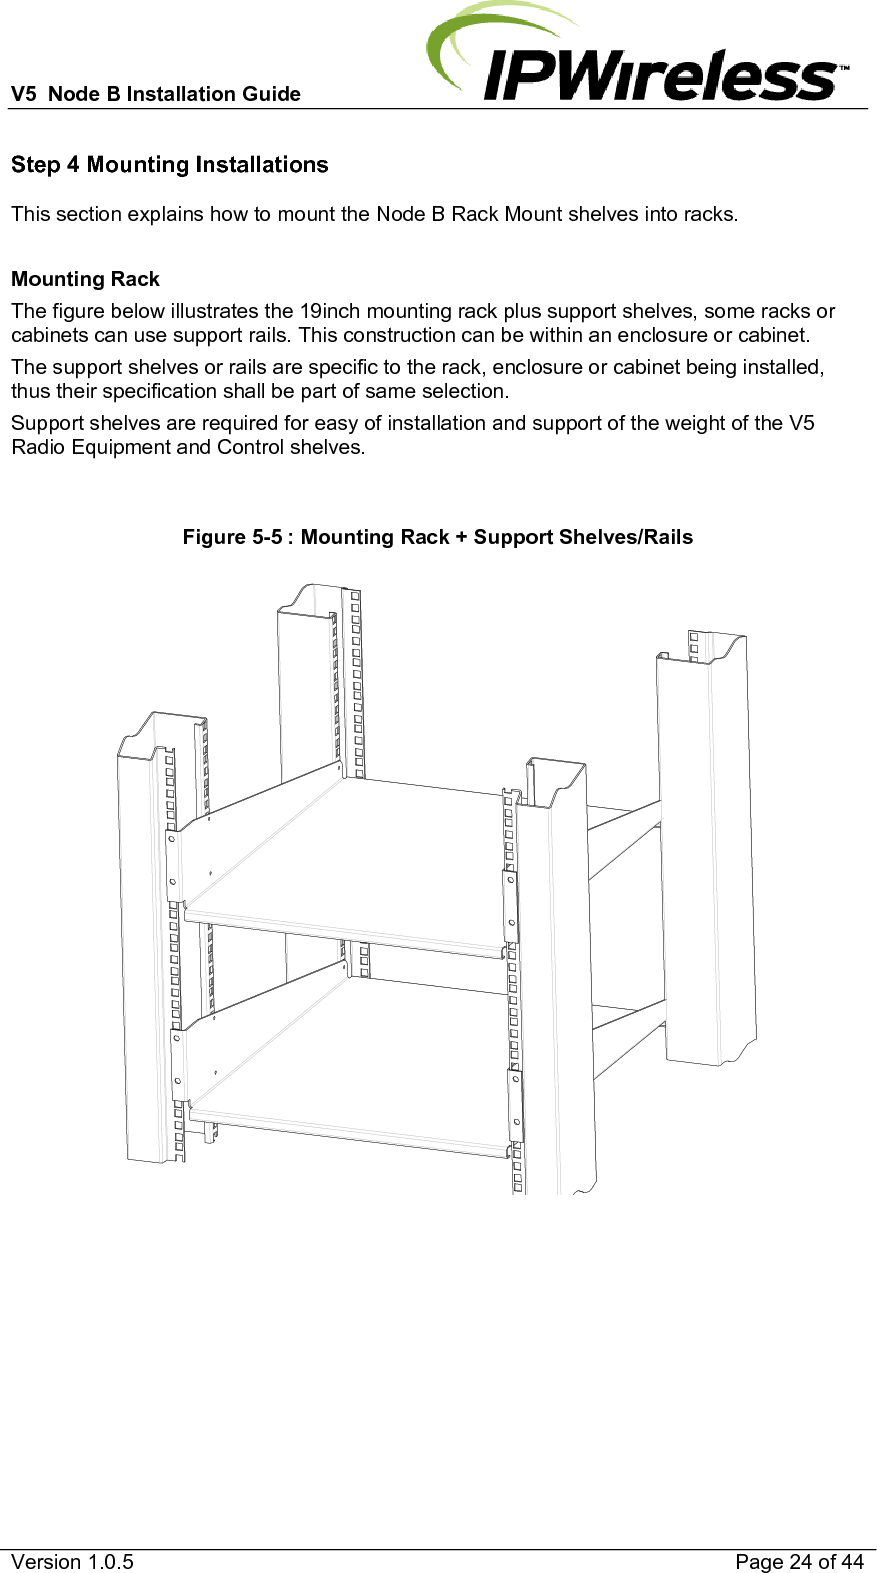 V5  Node B Installation Guide                           Version 1.0.5    Page 24 of 44 Step 4 Mounting Installations This section explains how to mount the Node B Rack Mount shelves into racks.  Mounting Rack The figure below illustrates the 19inch mounting rack plus support shelves, some racks or cabinets can use support rails. This construction can be within an enclosure or cabinet. The support shelves or rails are specific to the rack, enclosure or cabinet being installed, thus their specification shall be part of same selection. Support shelves are required for easy of installation and support of the weight of the V5 Radio Equipment and Control shelves.  Figure 5-5 : Mounting Rack + Support Shelves/Rails      